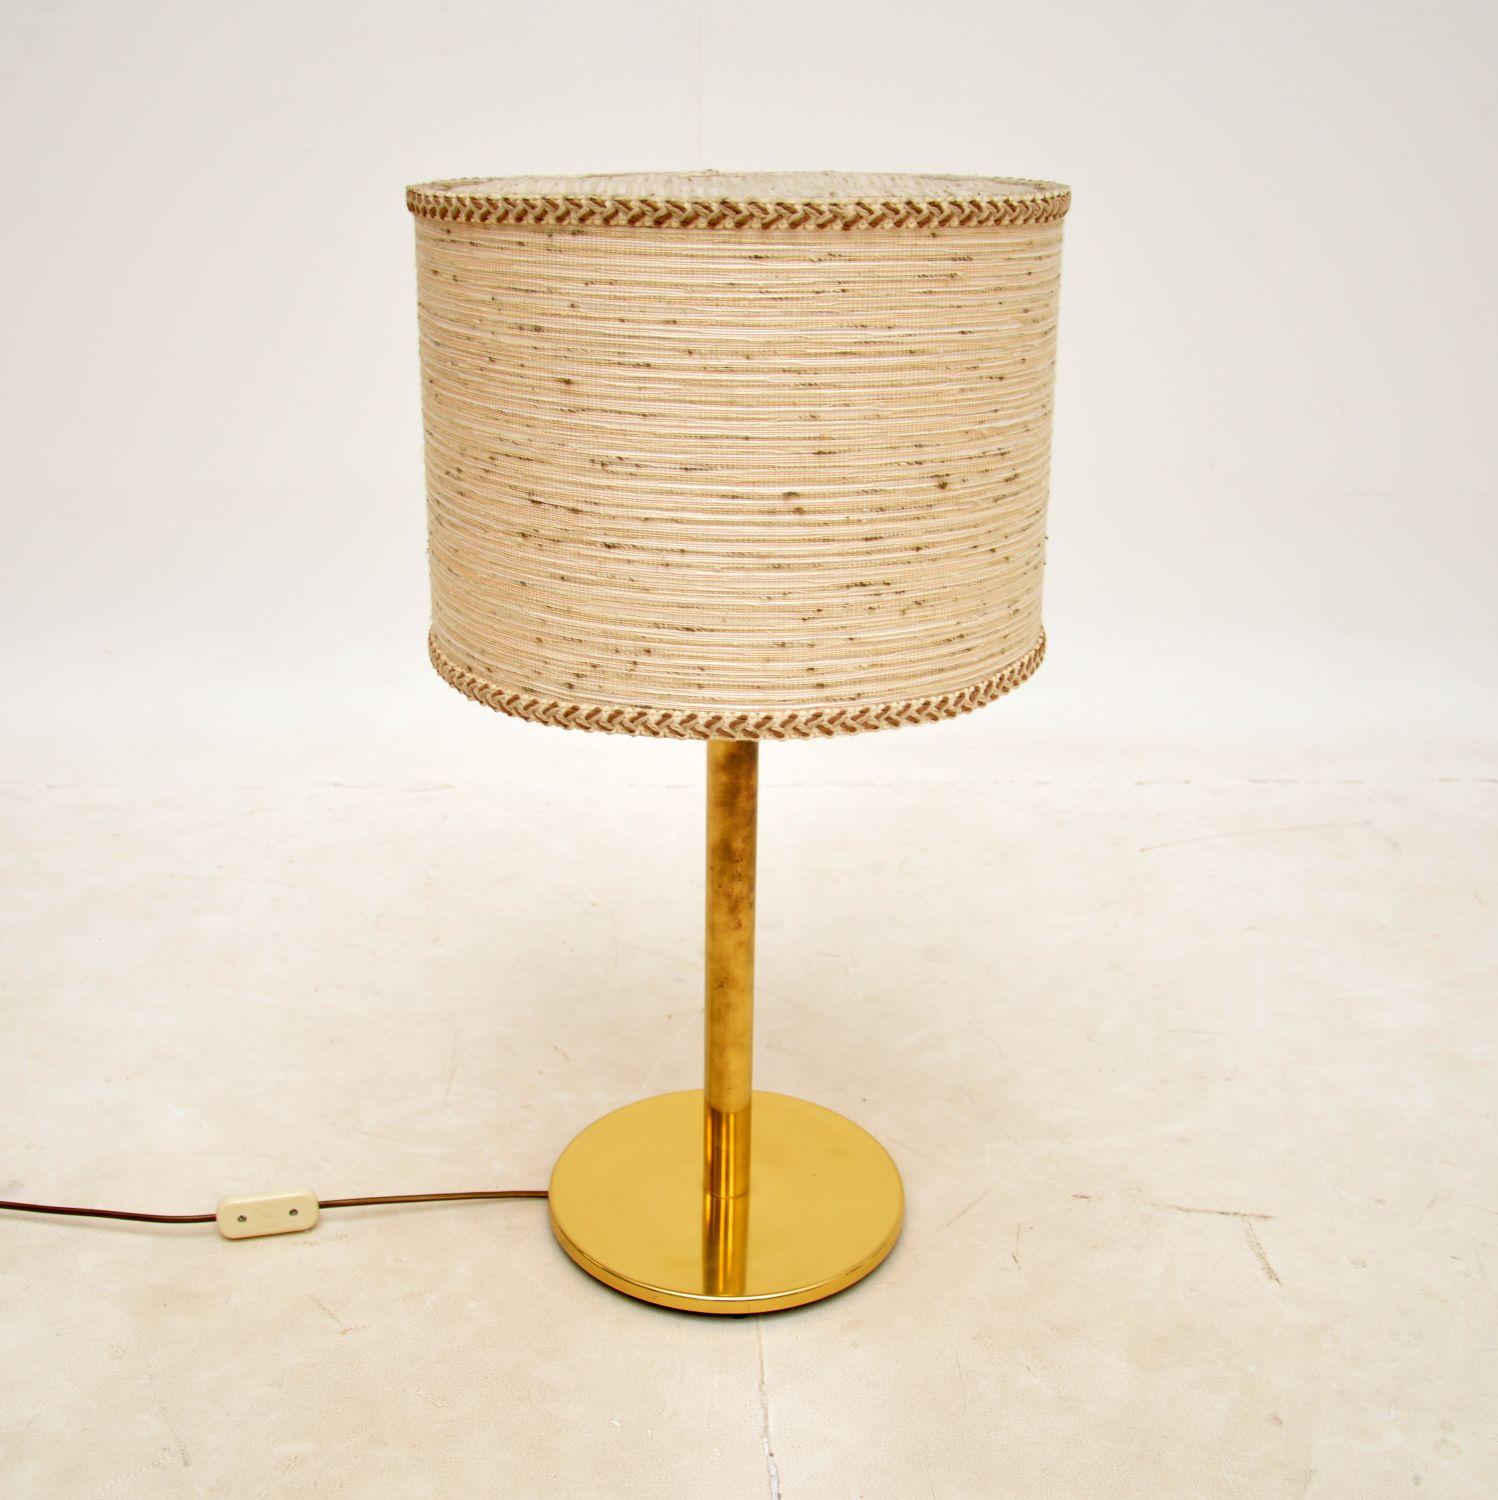 A large and impressive vintage table lamp in solid brass. This was recently imported from France, it dates from around the 1970’s.

It is of superb quality, with a thick and sturdy base. The shade is original, it appears to be a woven textured